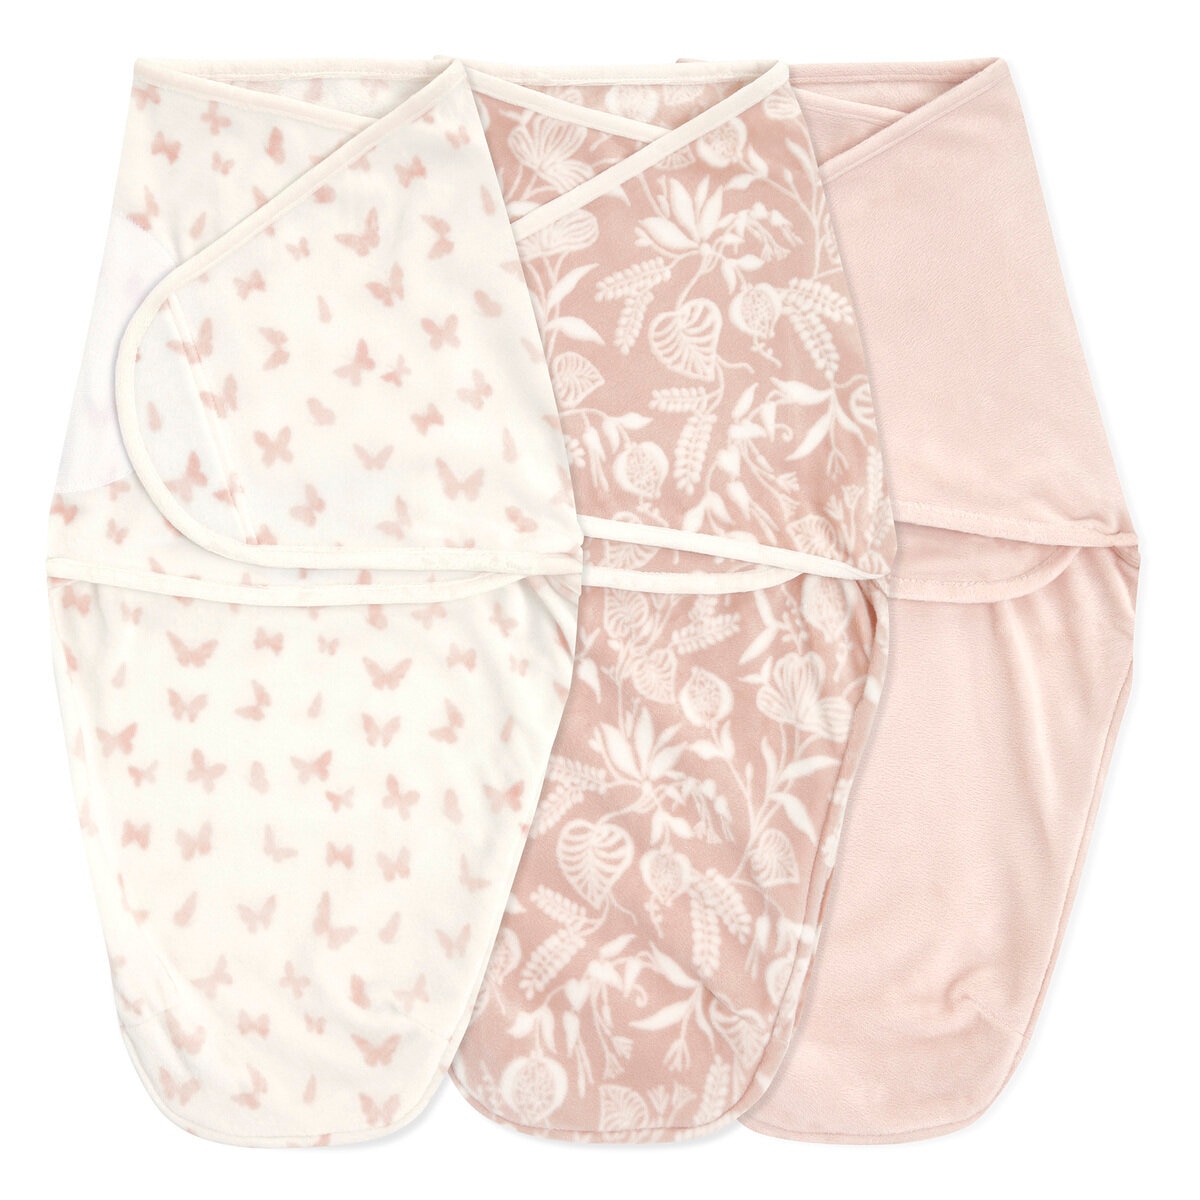 aden+anais Wrap Swaddle 3 Pack